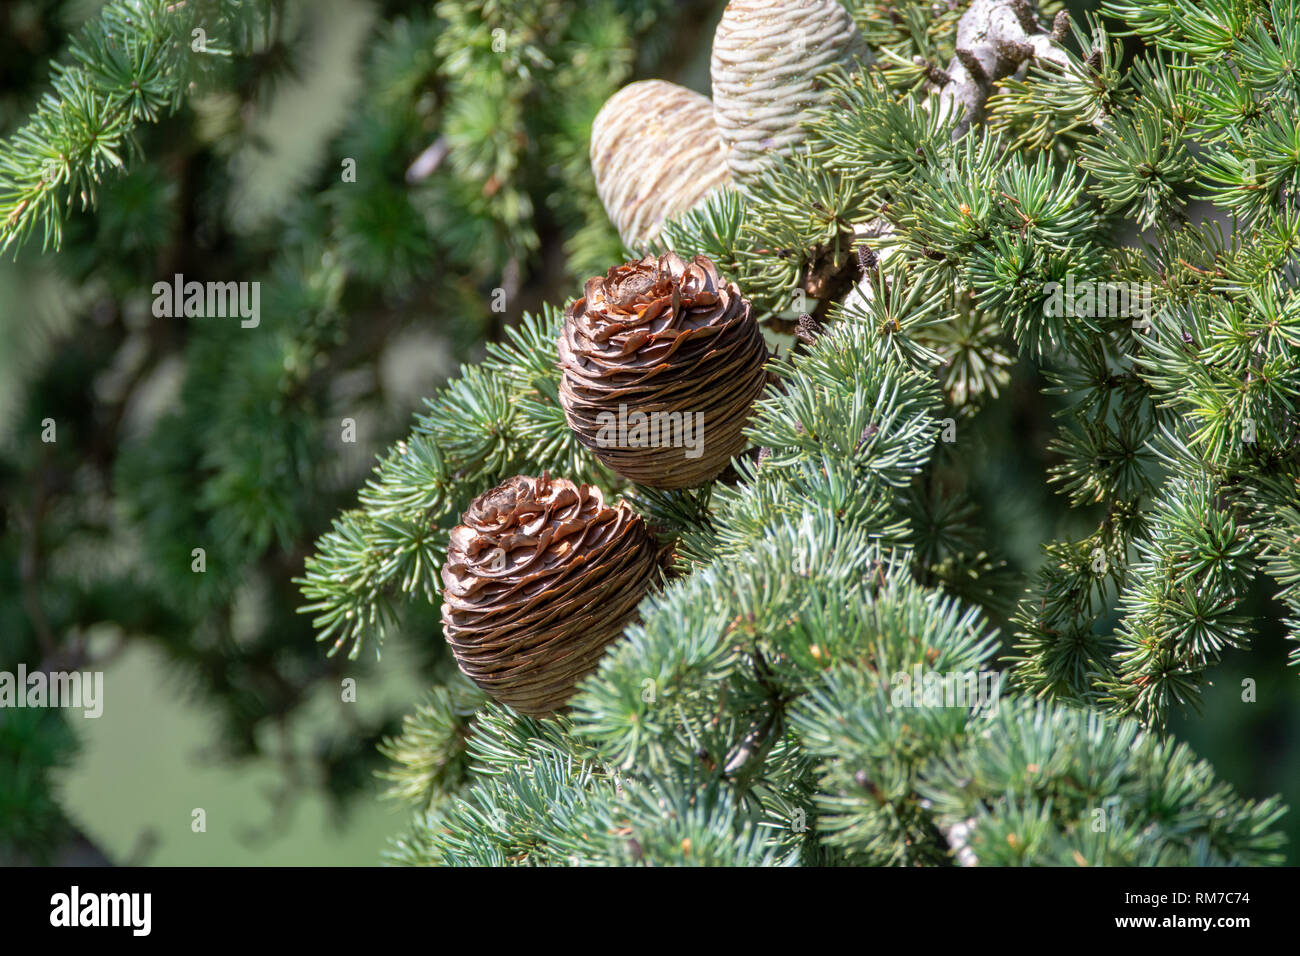 Himalayan cedar or deodar cedar tree with female and male cones, Christmas background close up Stock Photo